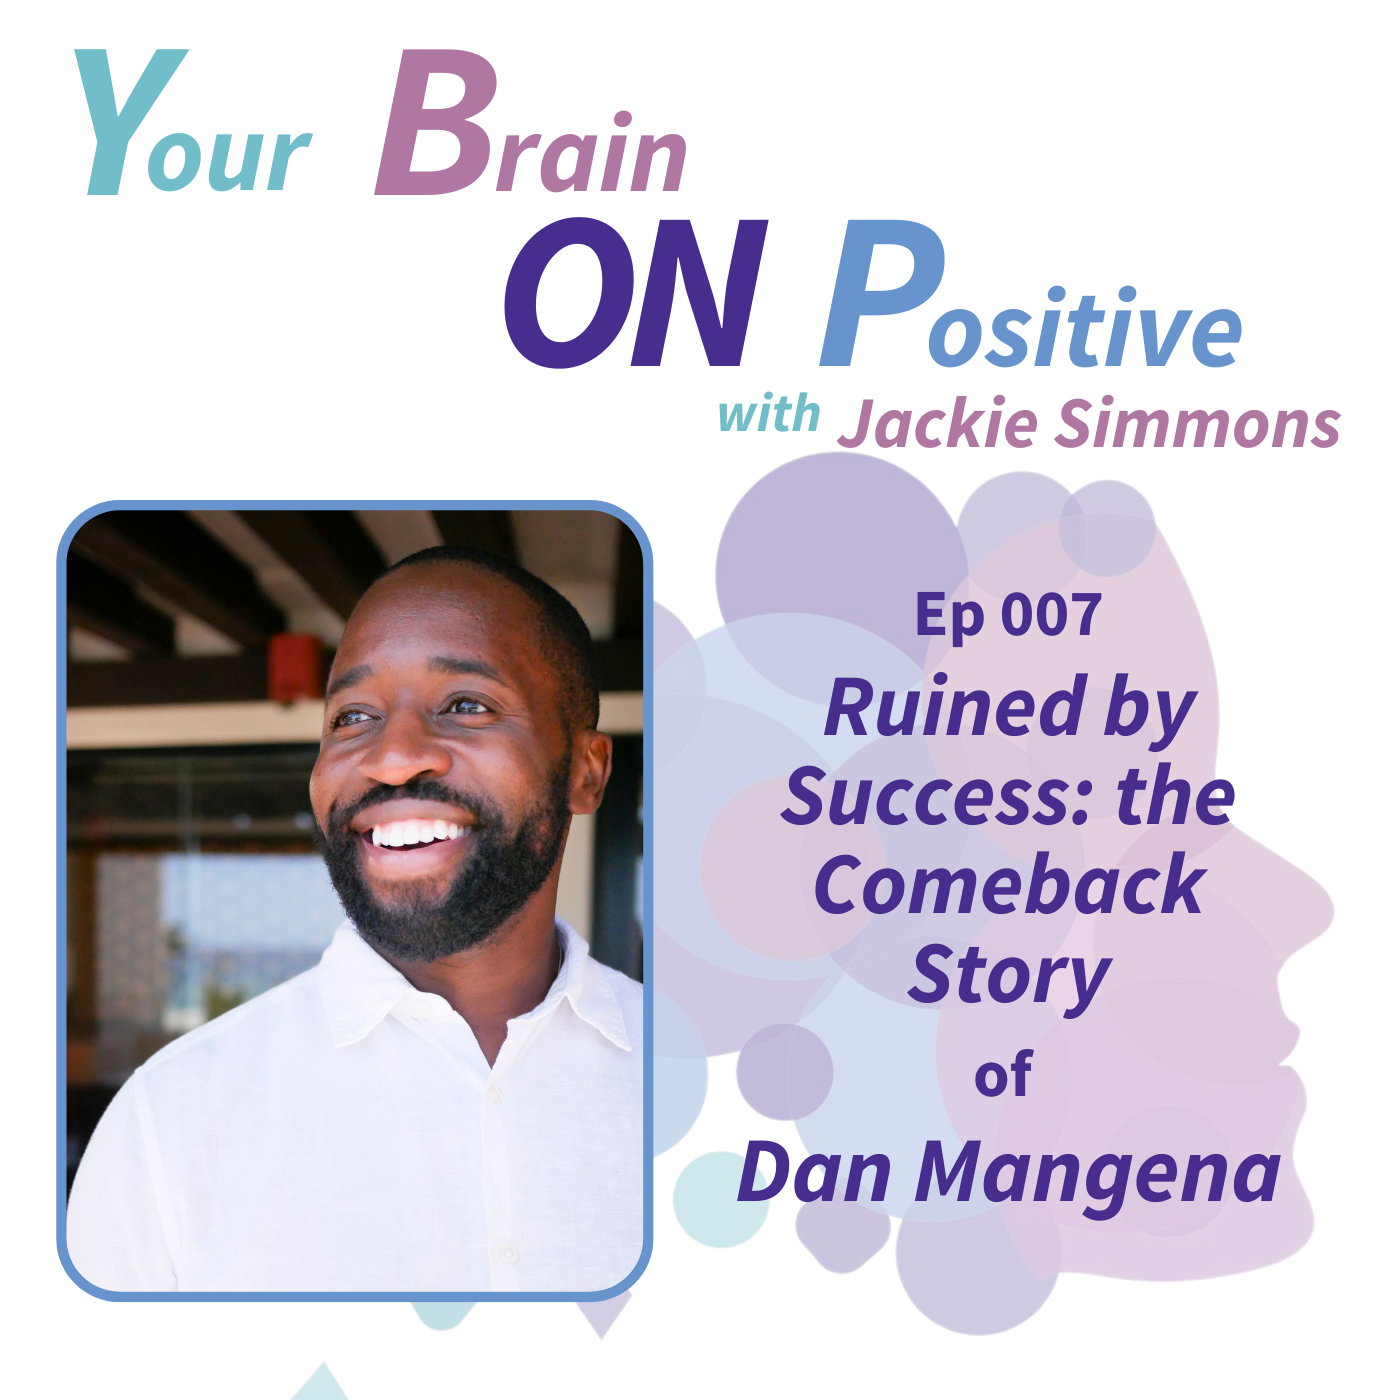 Ruined by Success: the Comeback Story of Dan Mangena